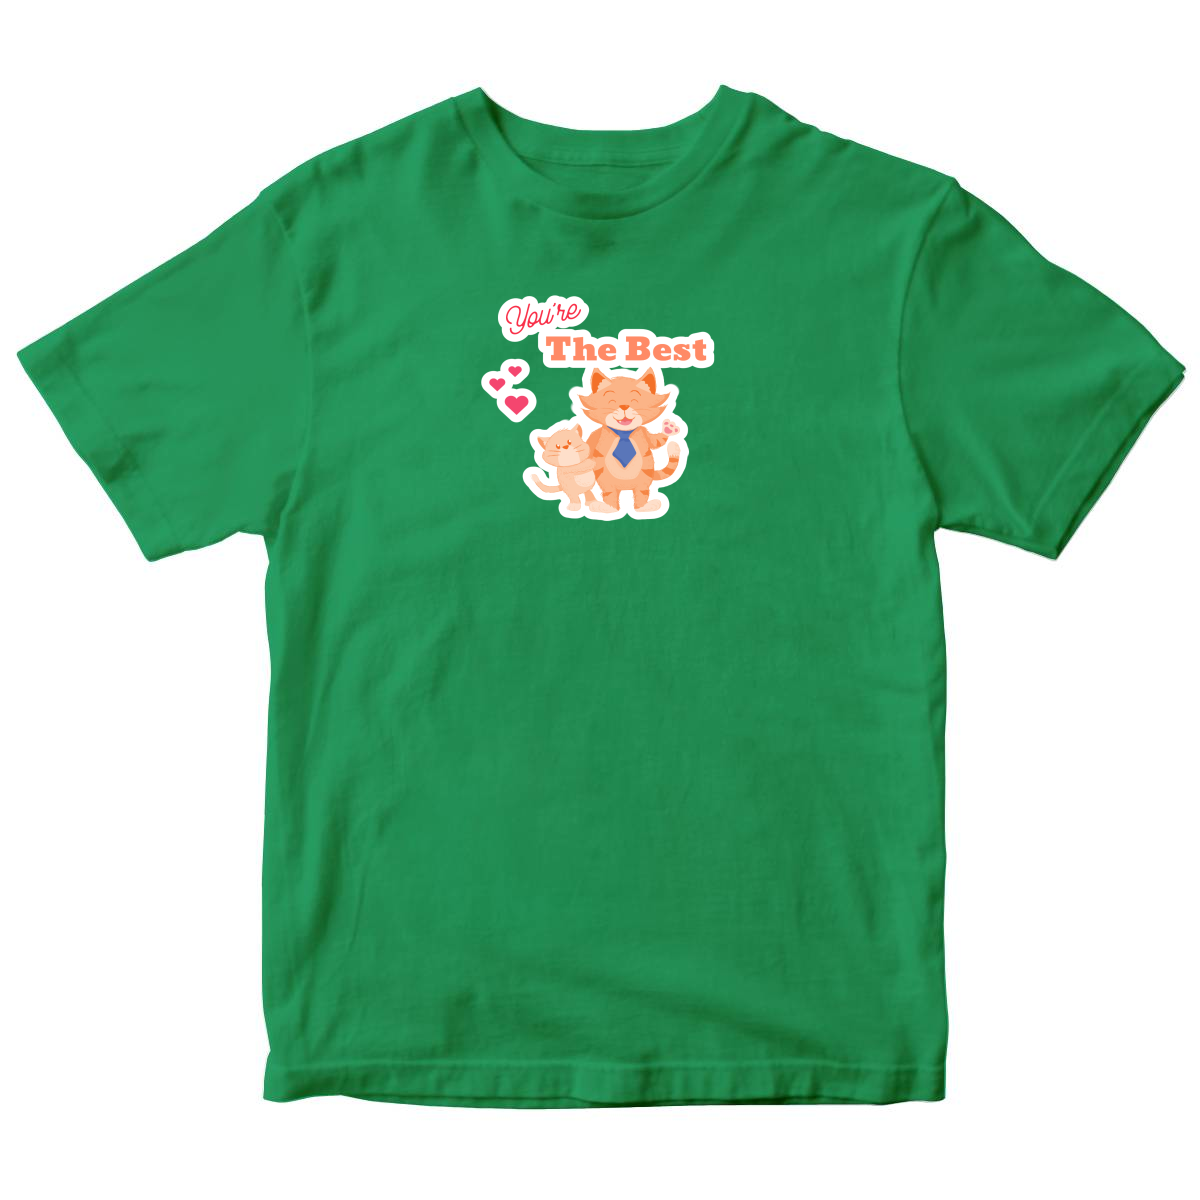 You are the Best Toddler T-shirt | Green